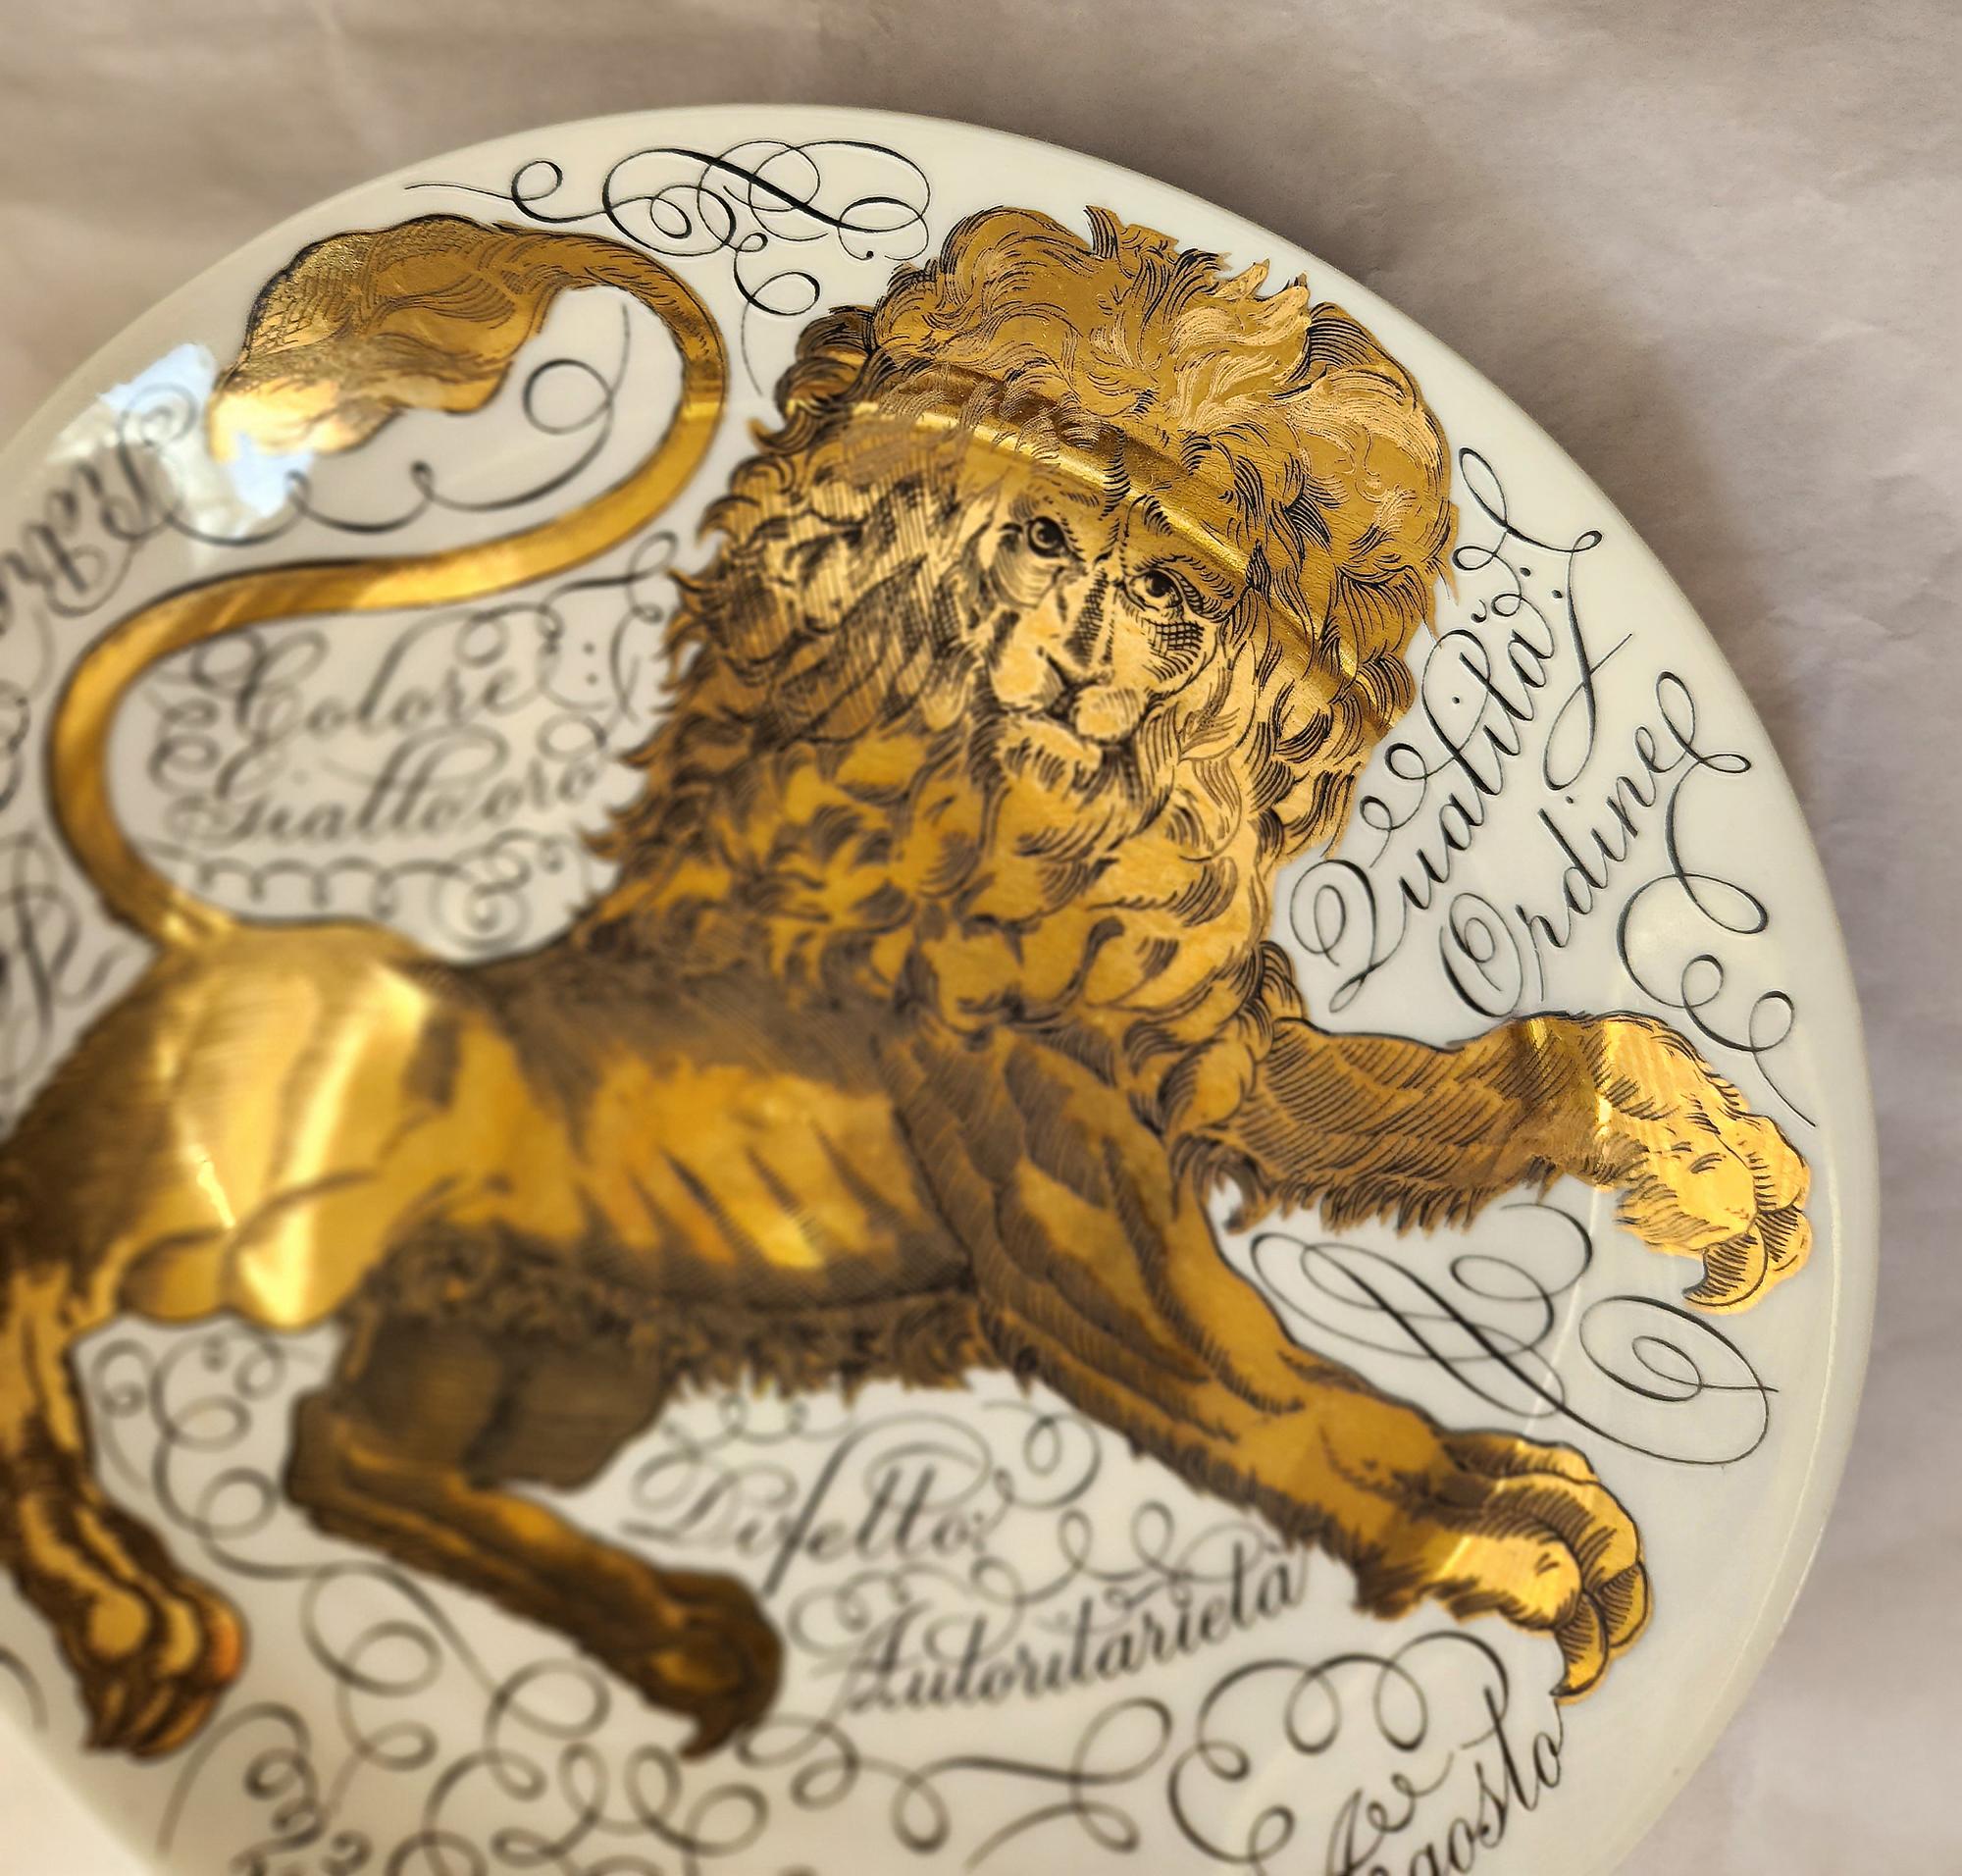 Vintage Piero Fornasetti Porcelain Zodiac Plate,
Astrological Sign Leo,
Astrali Pattern,
Made for Corisia,
Dated 1965, No 2.

The plate for the sign LEO is dated 1965 and is numbered #2.  The plate depicts the Astrological Zodiac sign Leo which is